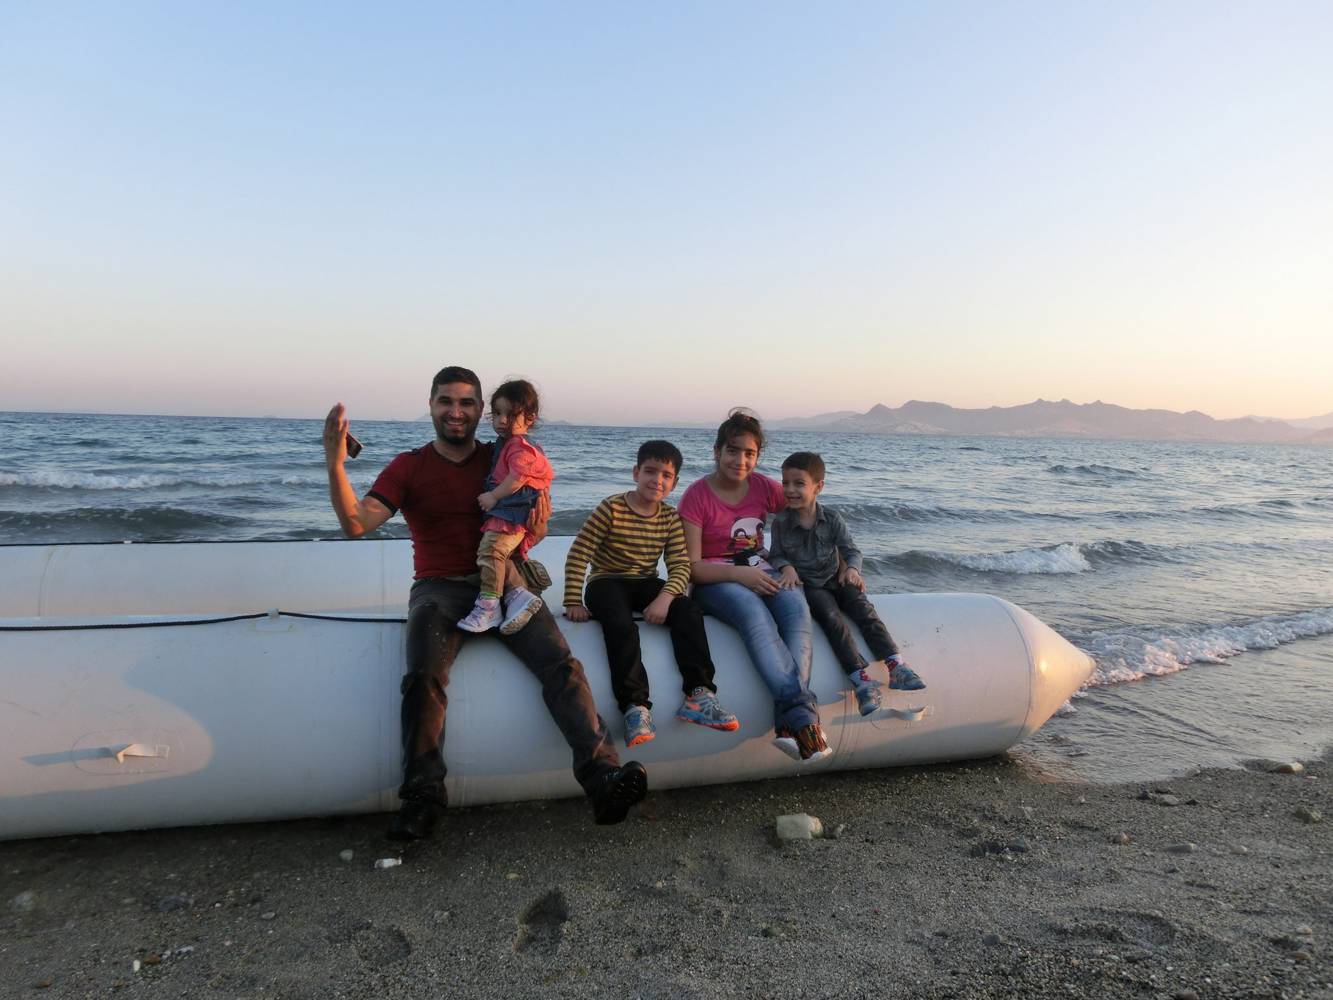 Iraqi refugees arriving at the Greek island of Kos. Photo: Christopher Jahn/IFRC